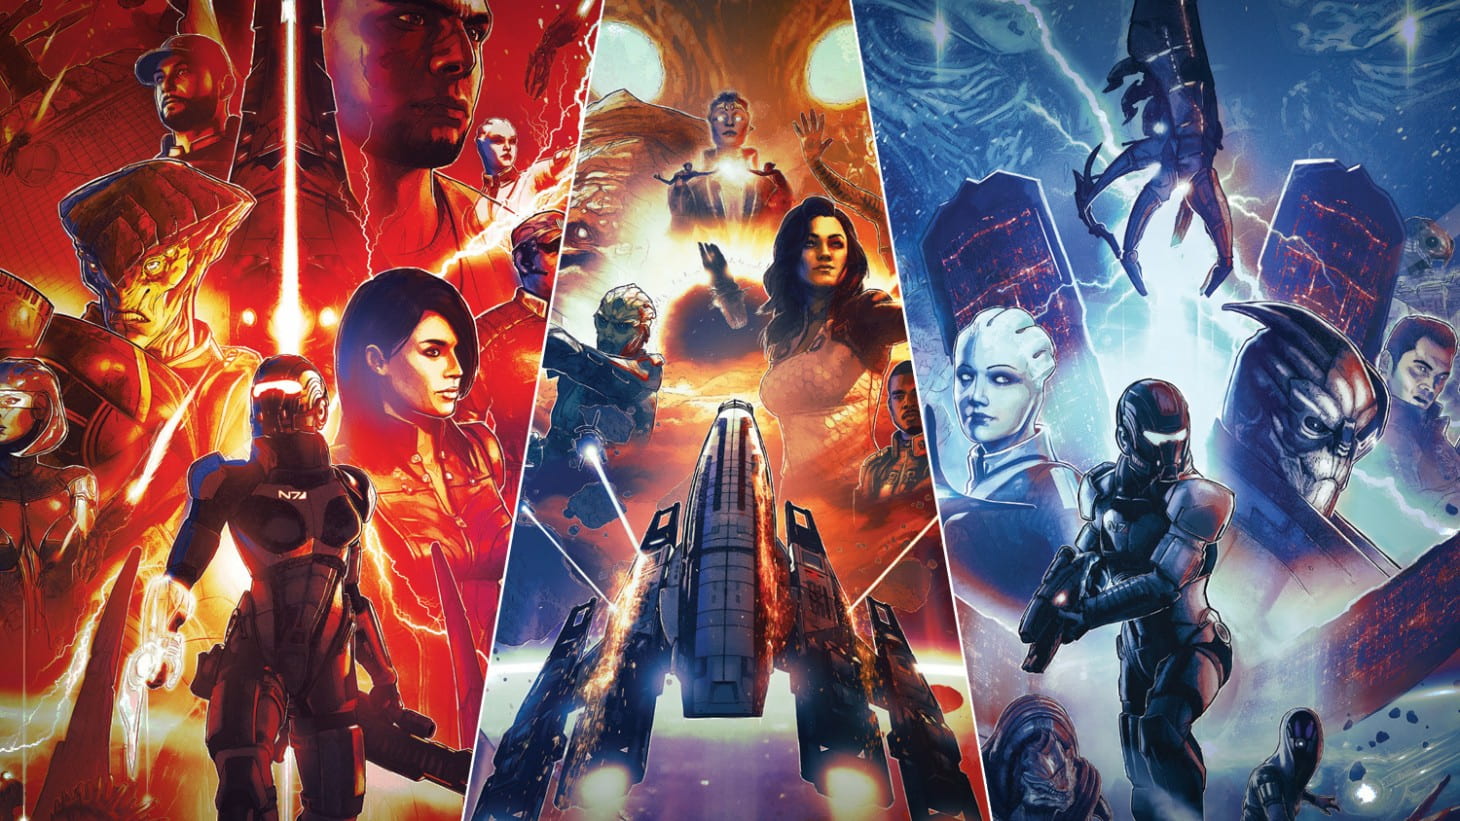 Artwork depicting characters and events from the "Mass Effect" video game series.